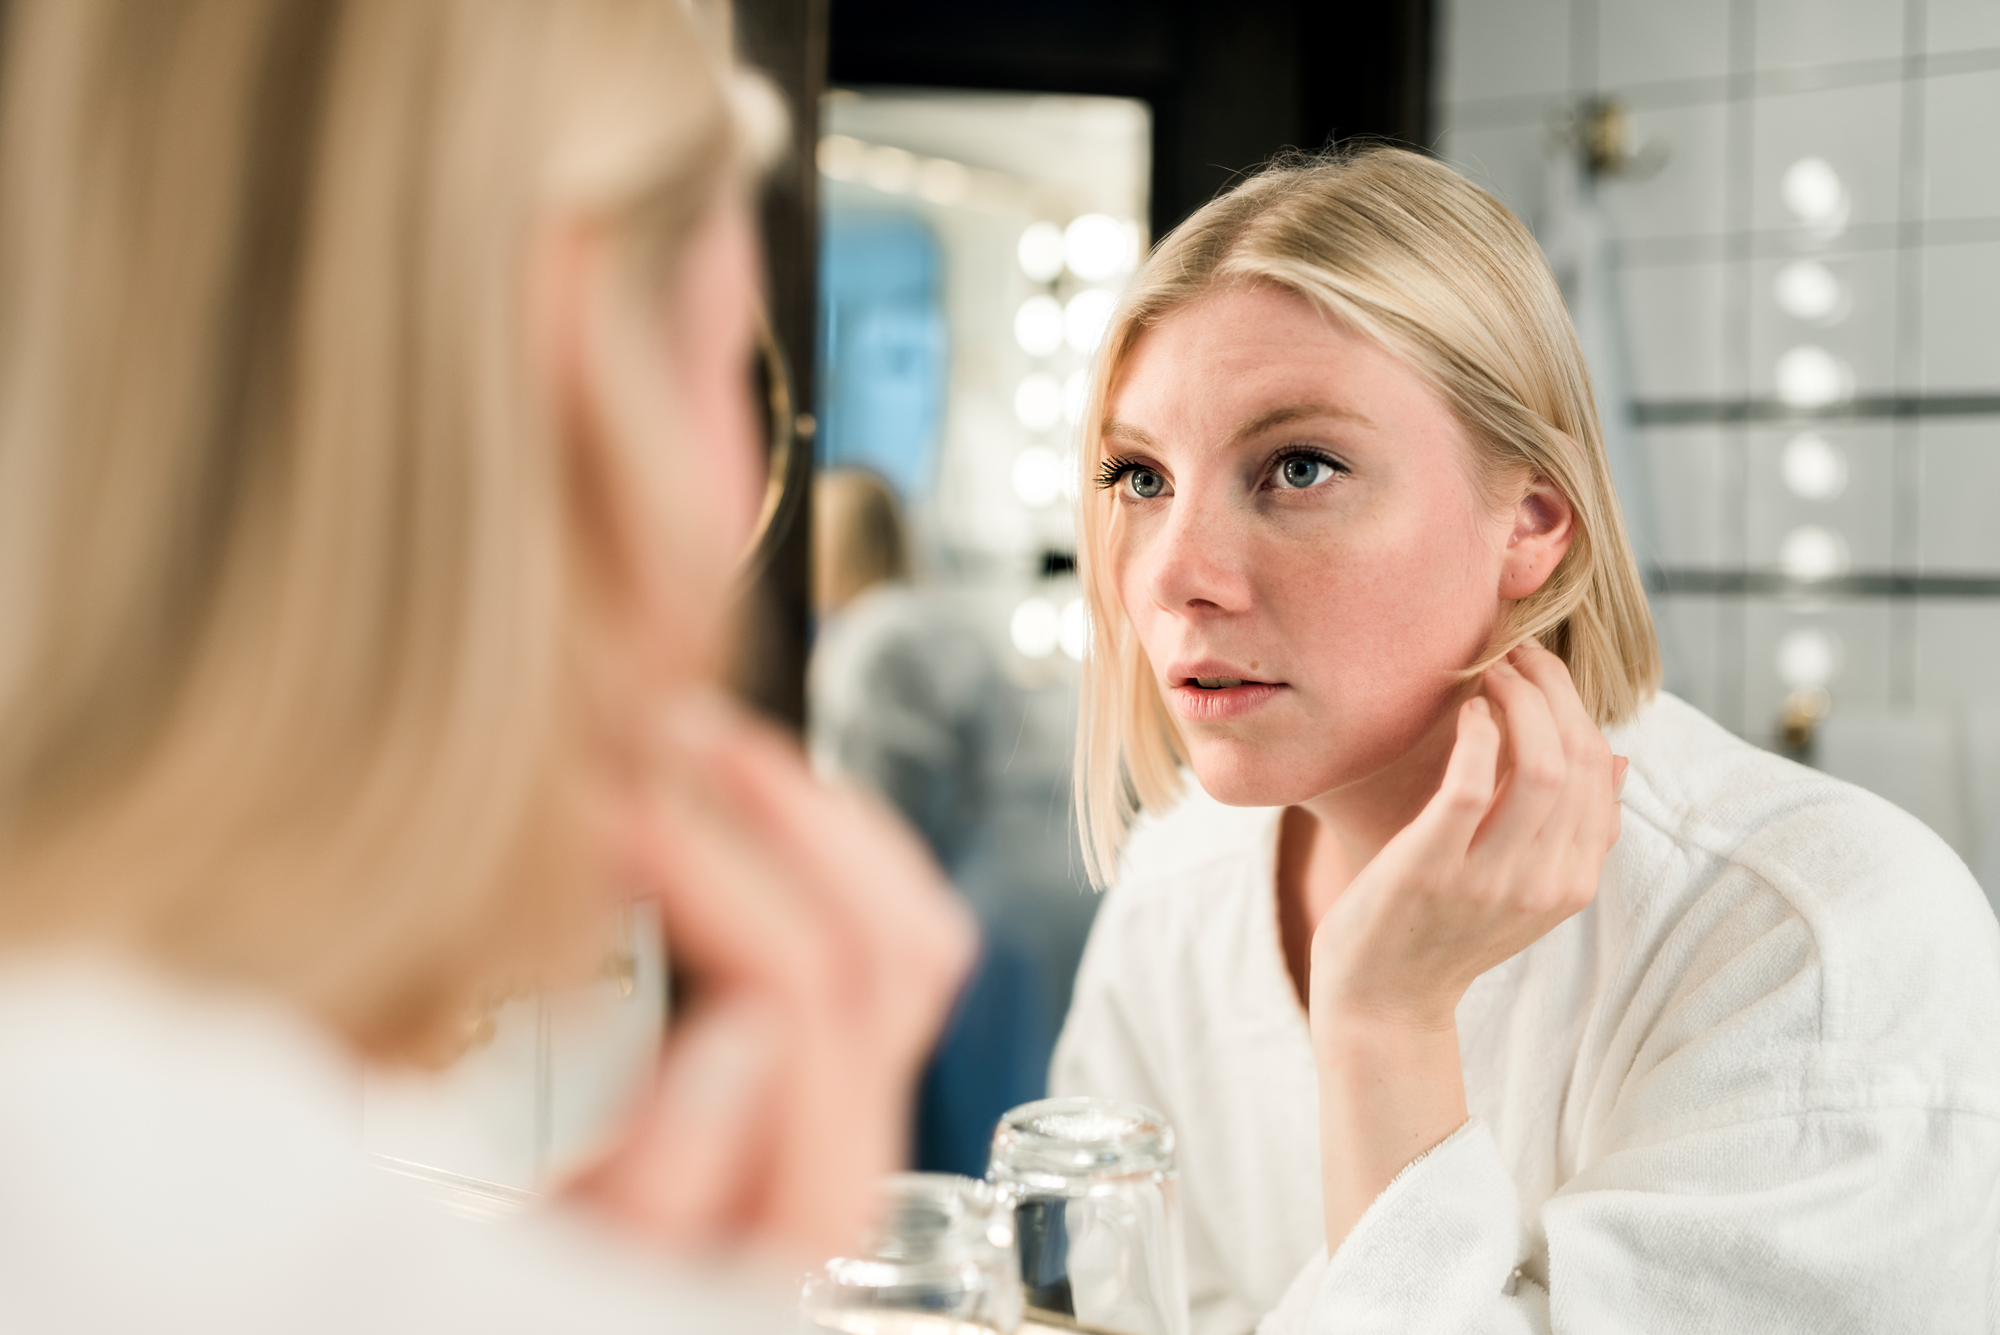 Should retinol be used before or after moisturizer?